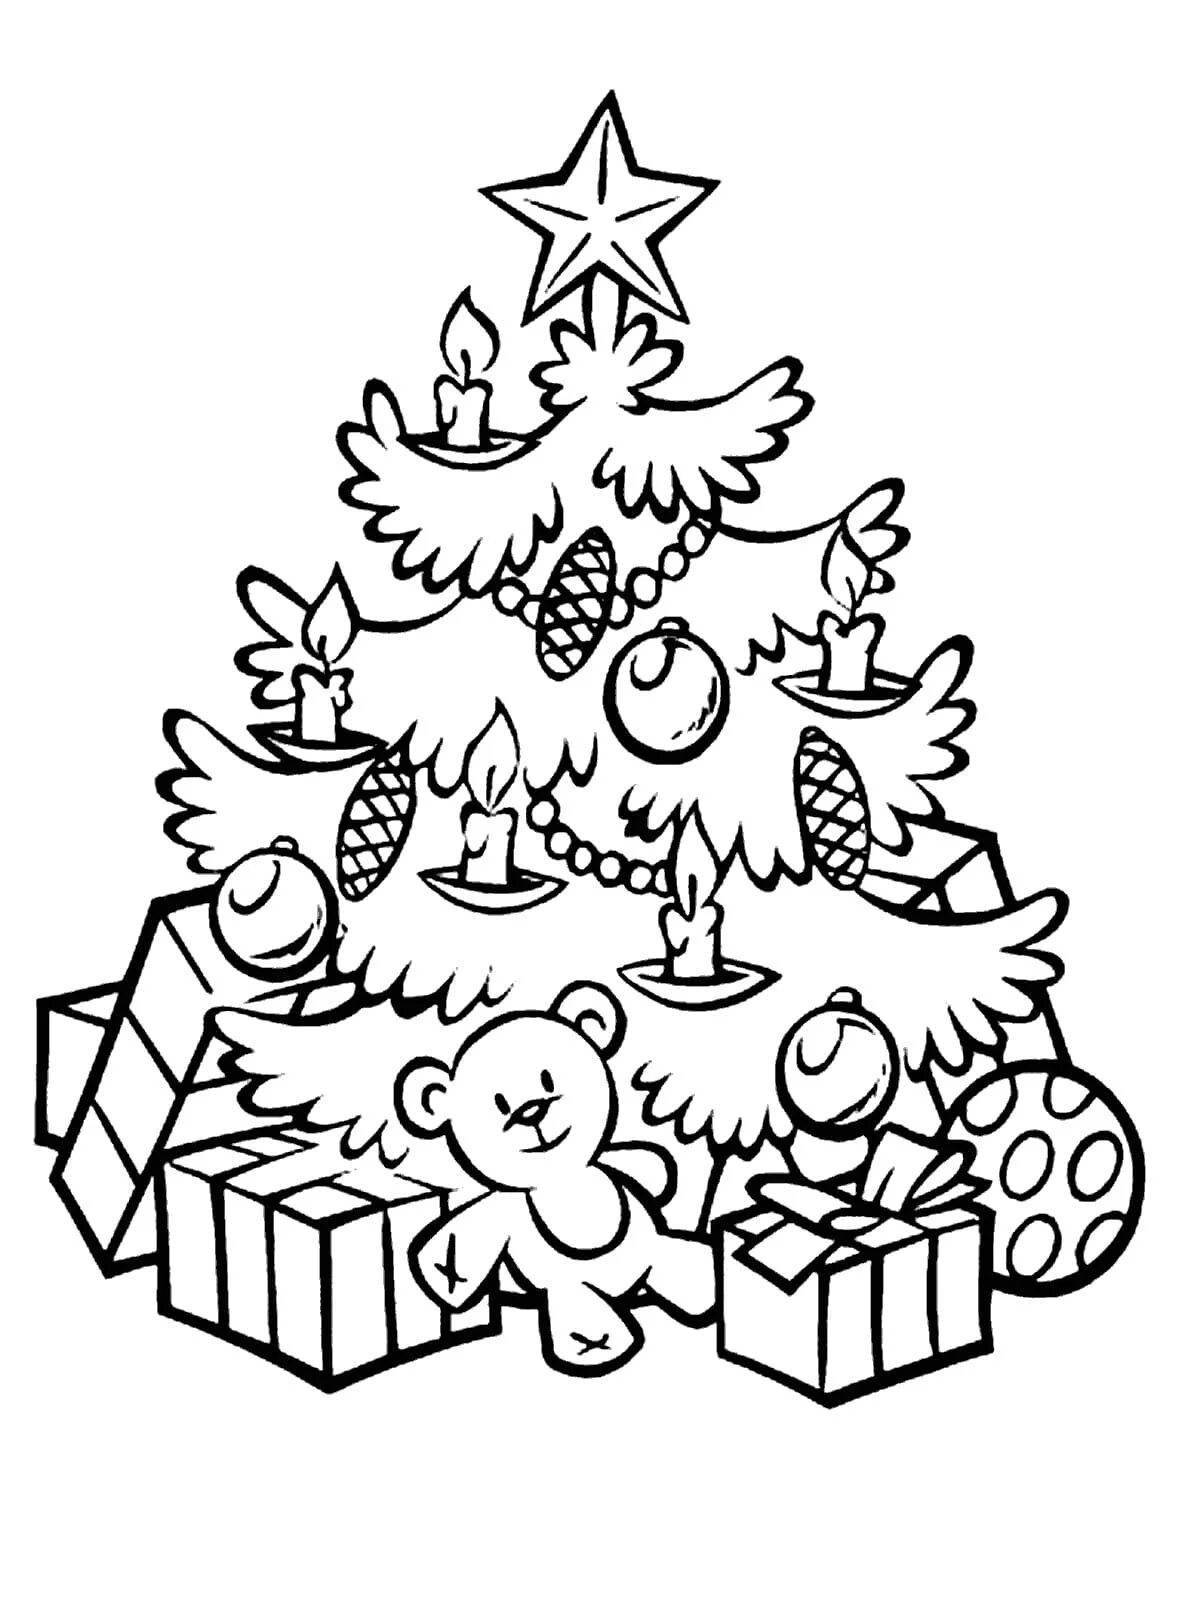 Glowing Christmas tree coloring page